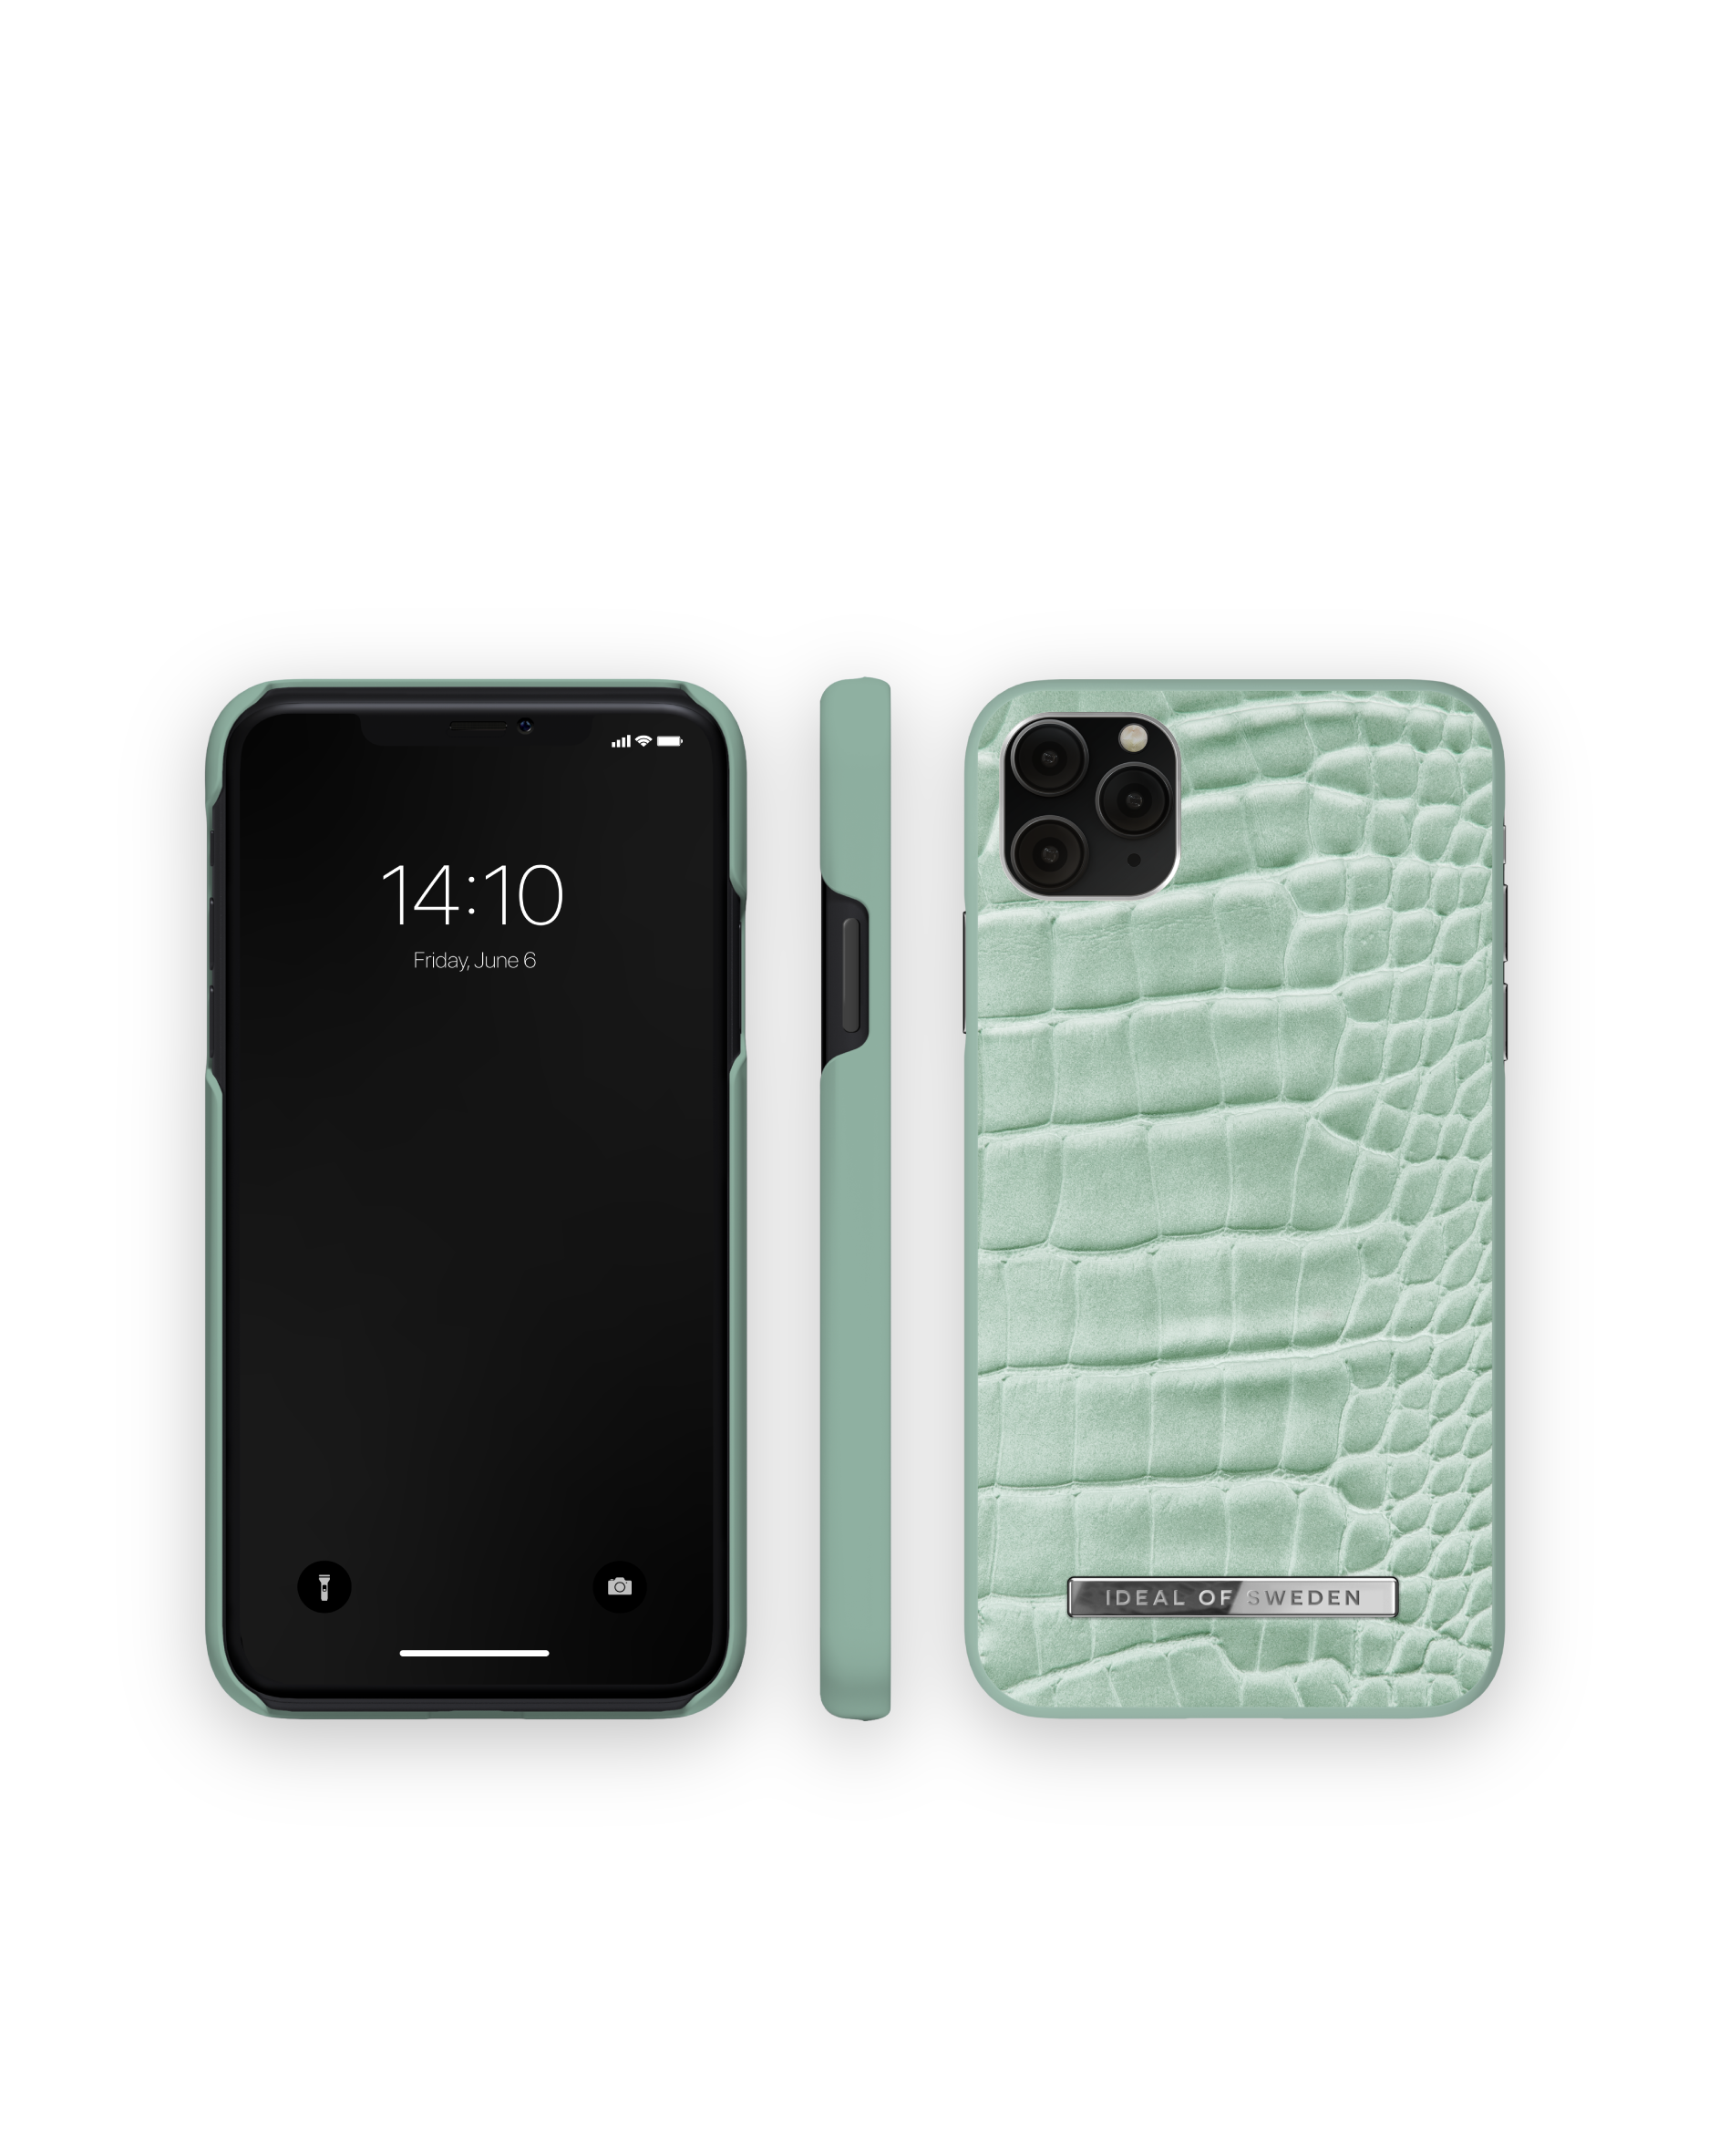 IDEAL OF Pro 11 Apple Bookcover, Max, iPhone Apple, SWEDEN XS Croco IDPWSS21-I1965-261, Mint Max, iPhone Apple